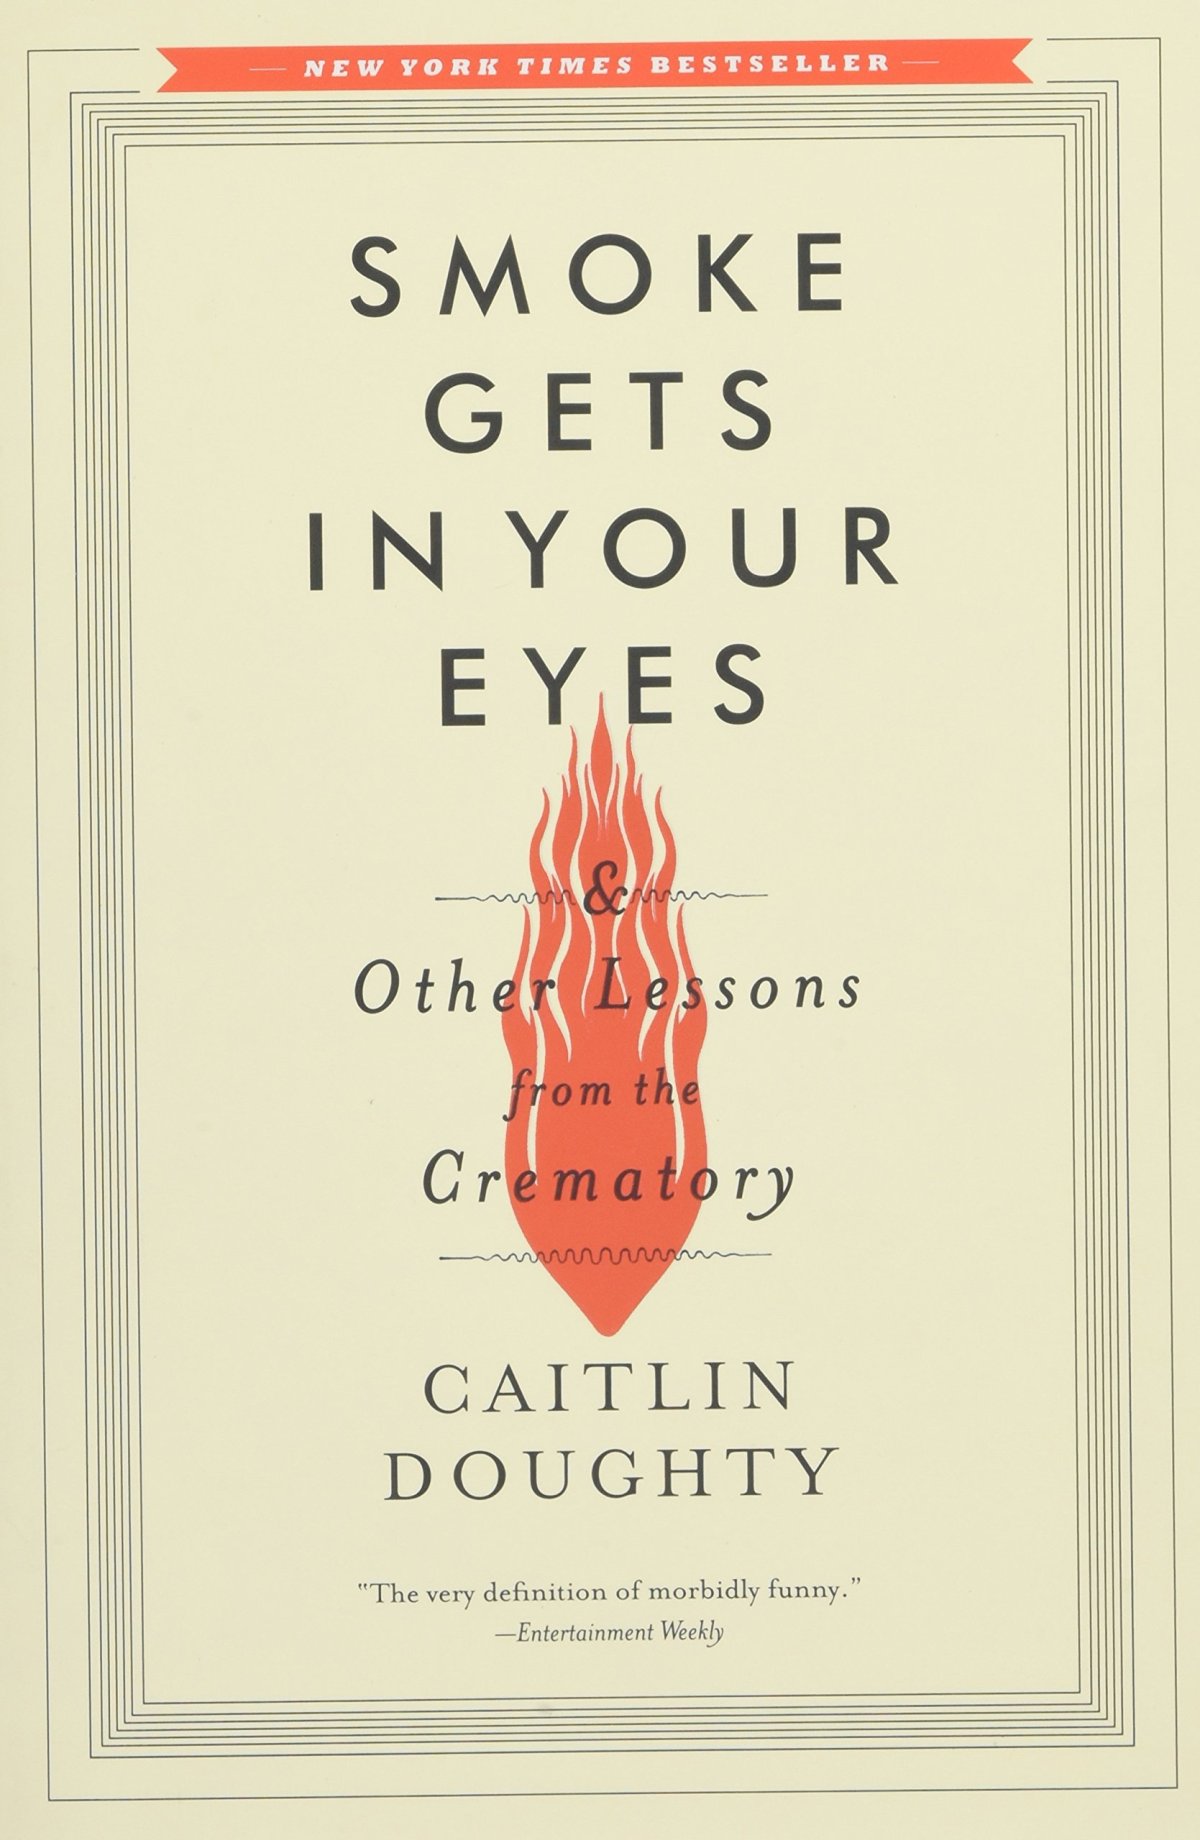 Book 17 – Smoke Gets in Your Eyes by Caitlin Doughty